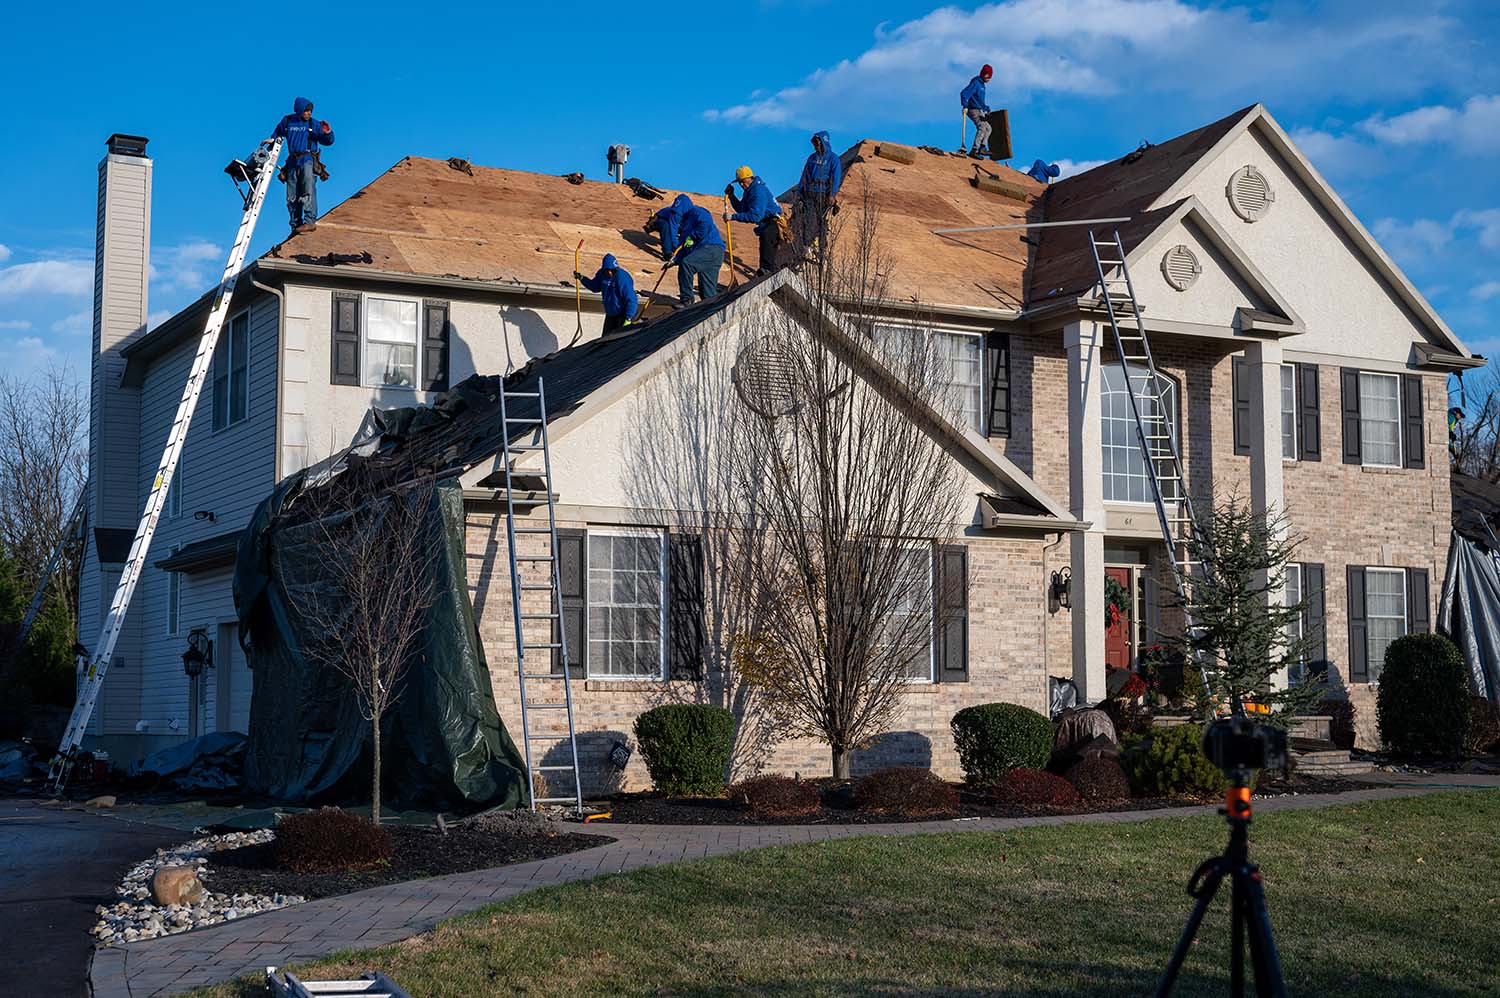 Washington Roofing repair company - residential roofing contractors in Washington, PA (medium image)